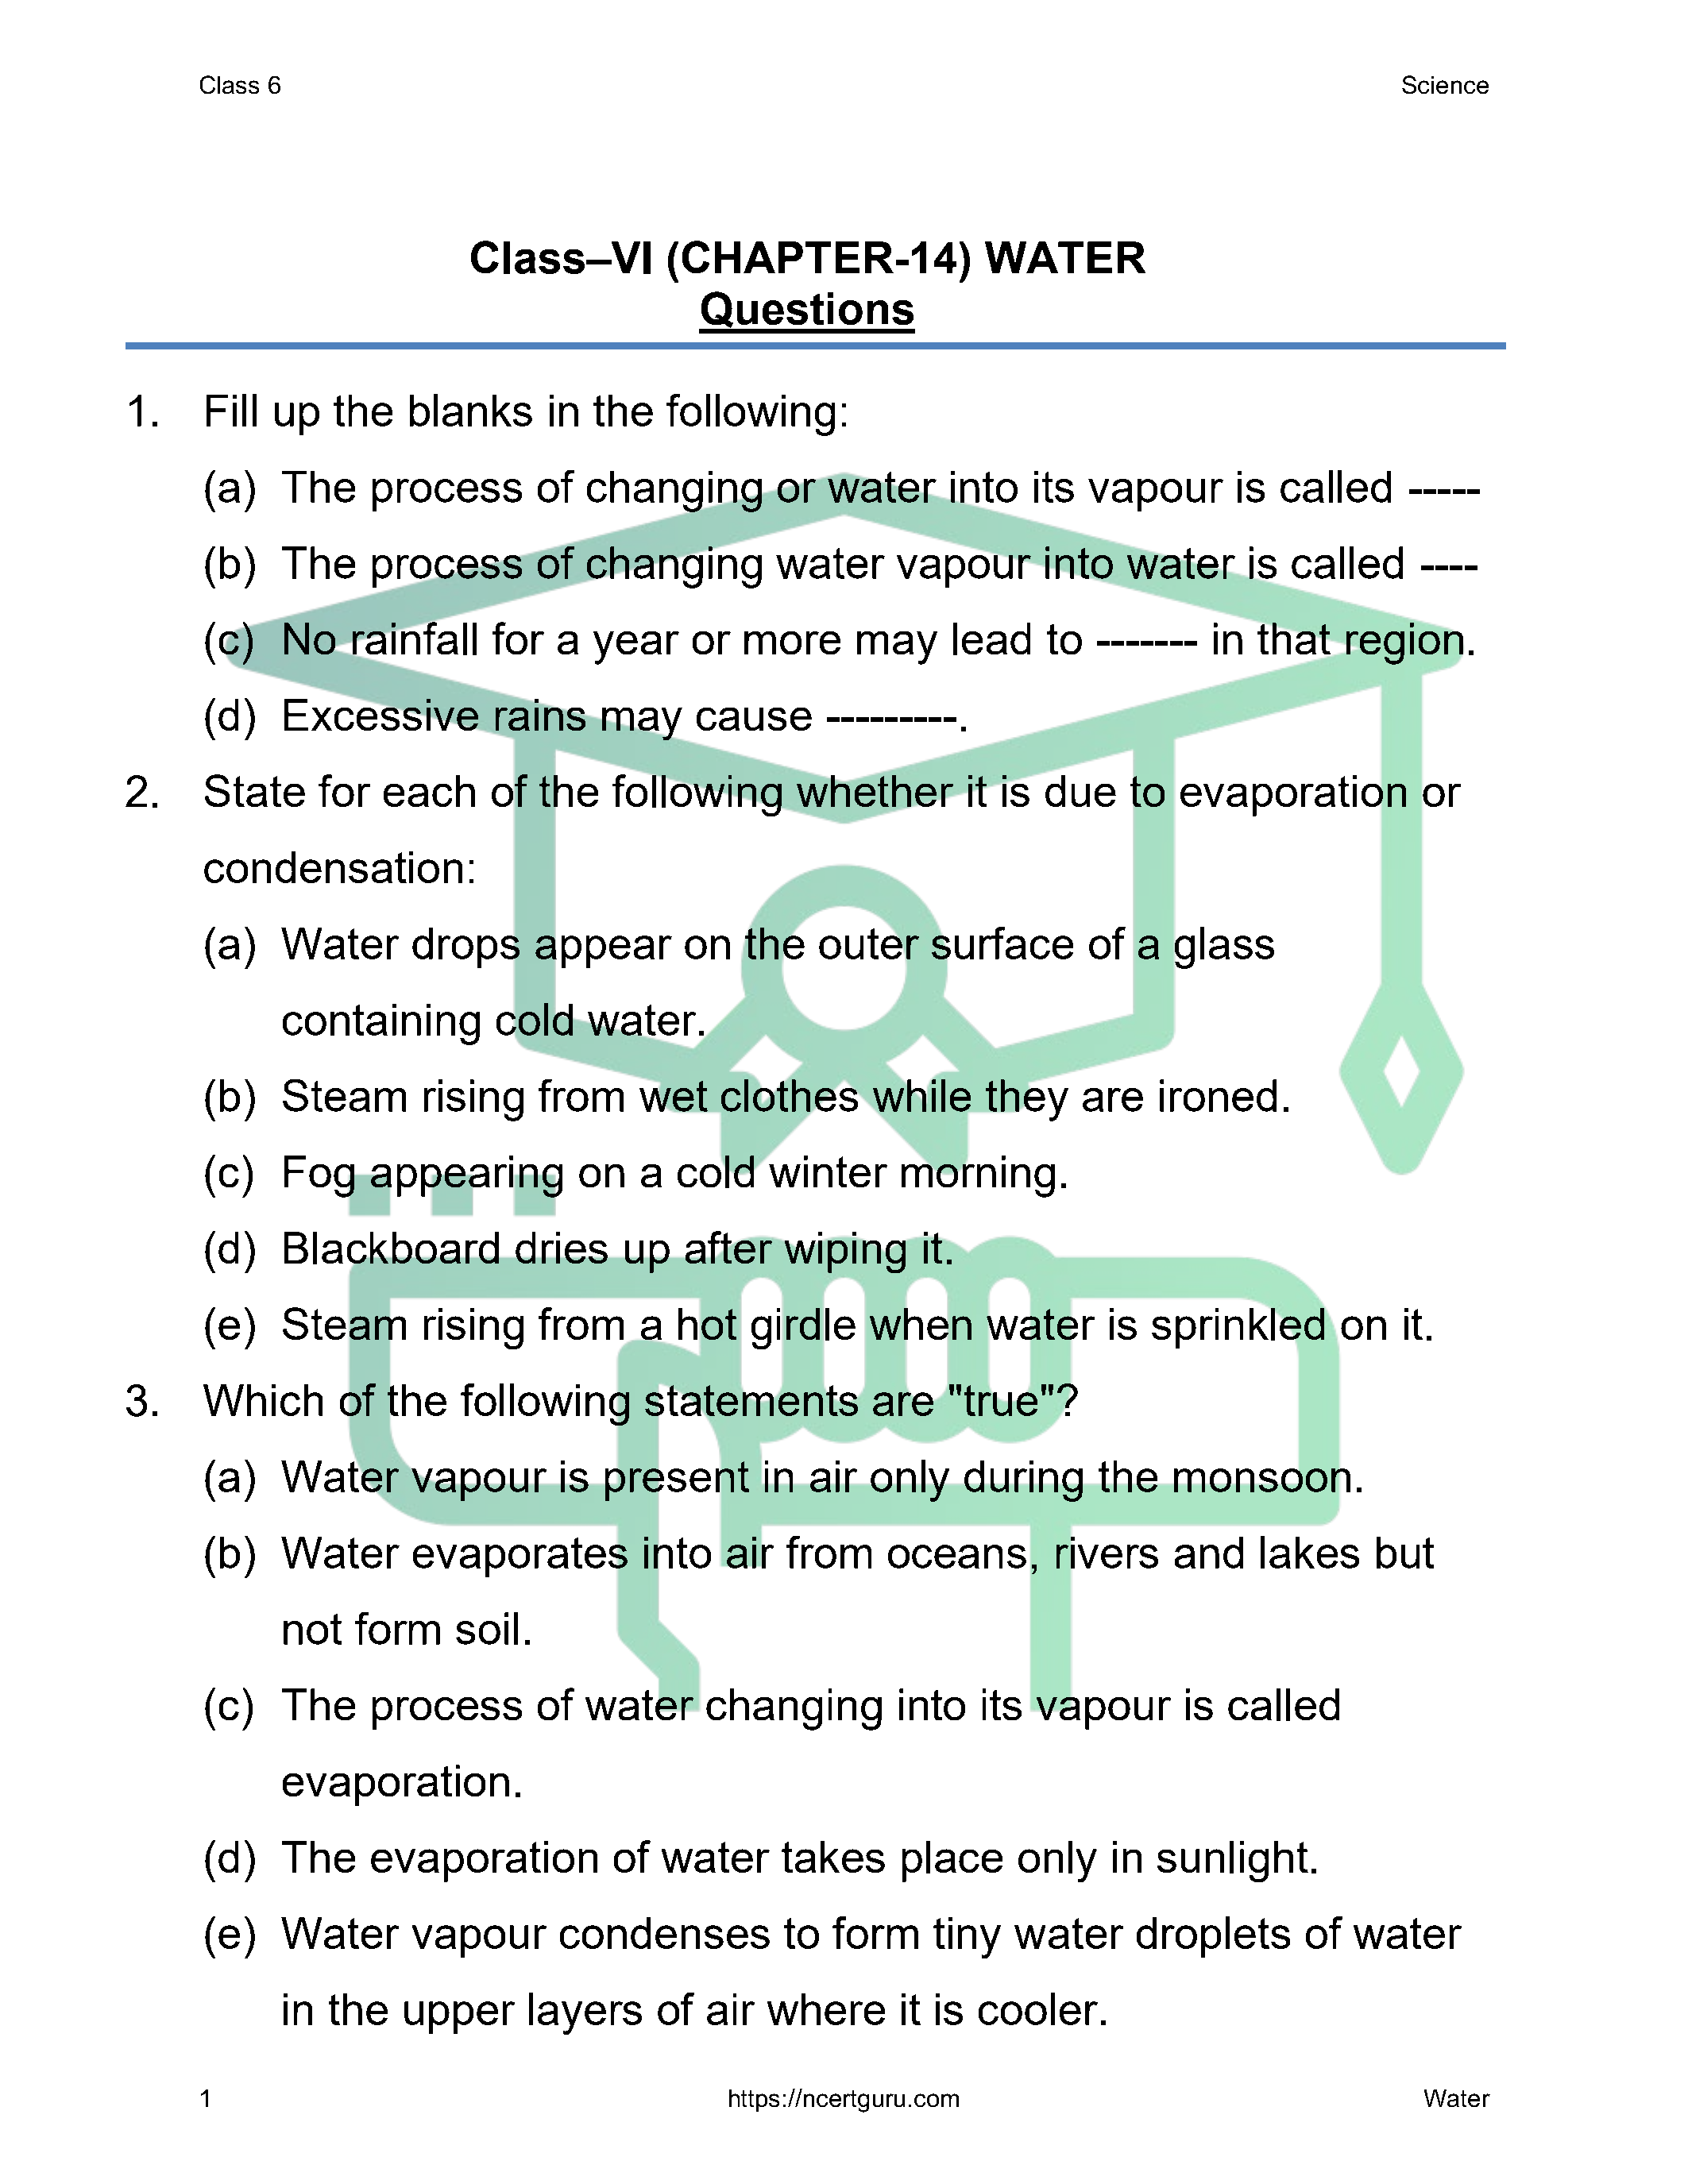 NCERT Solutions for Class 6 science Chapter 14